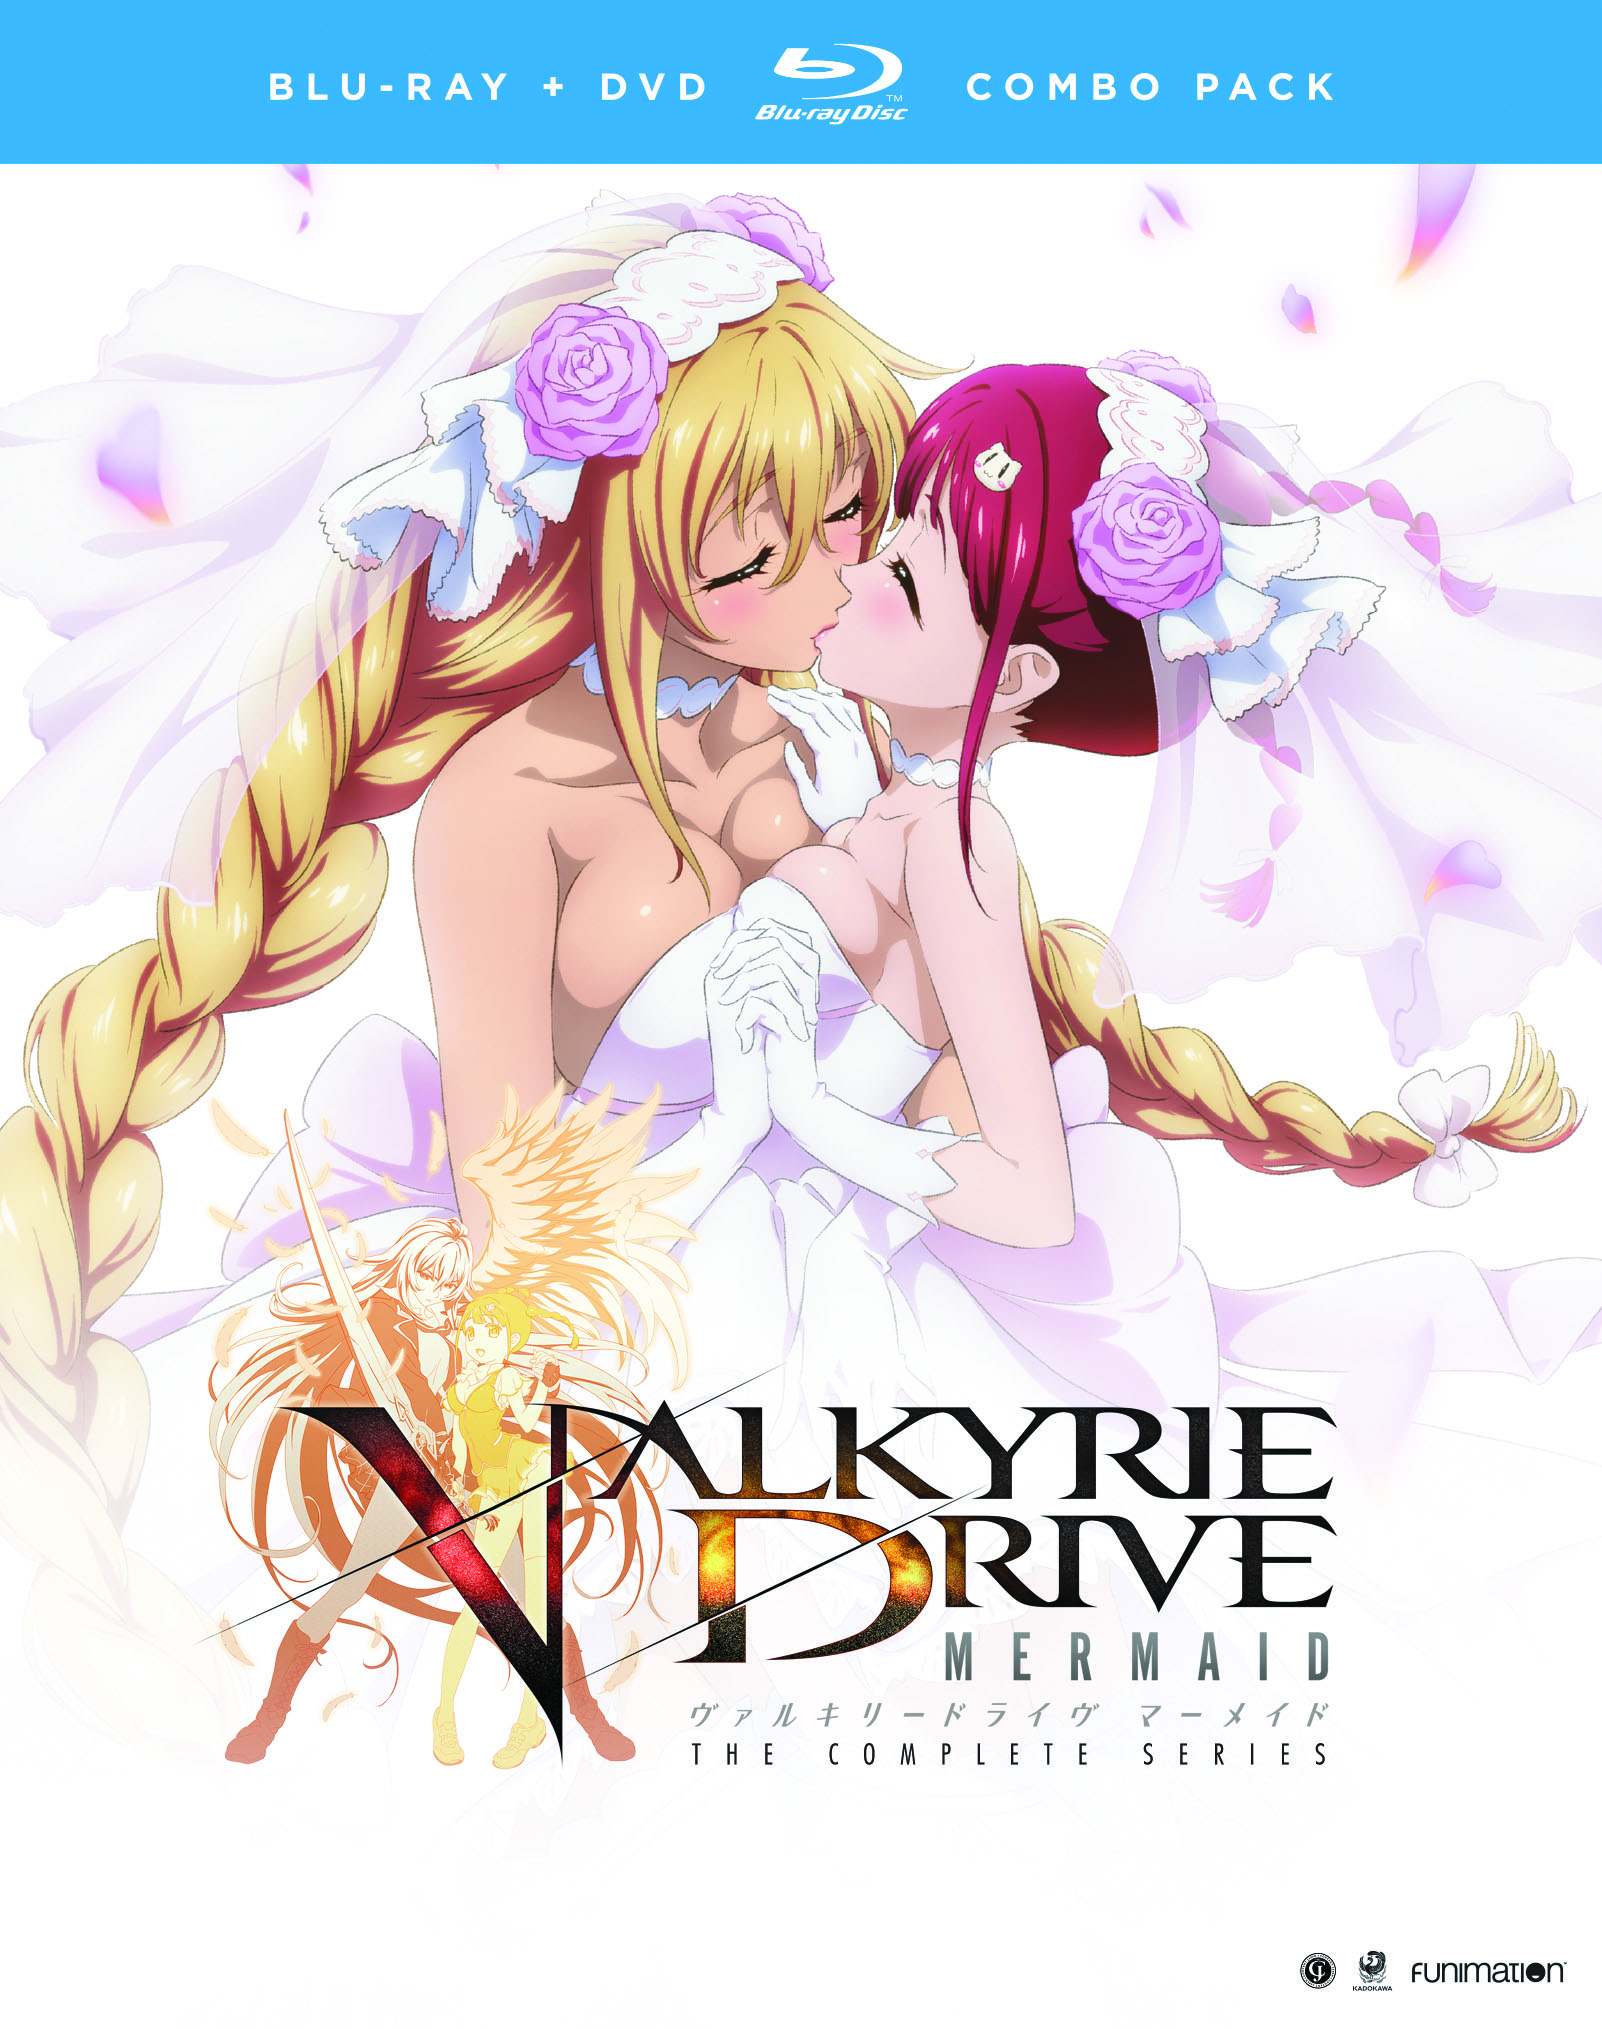 New Valkyrie Drive -Bhikkhuni- Trailer Shows Game Features And